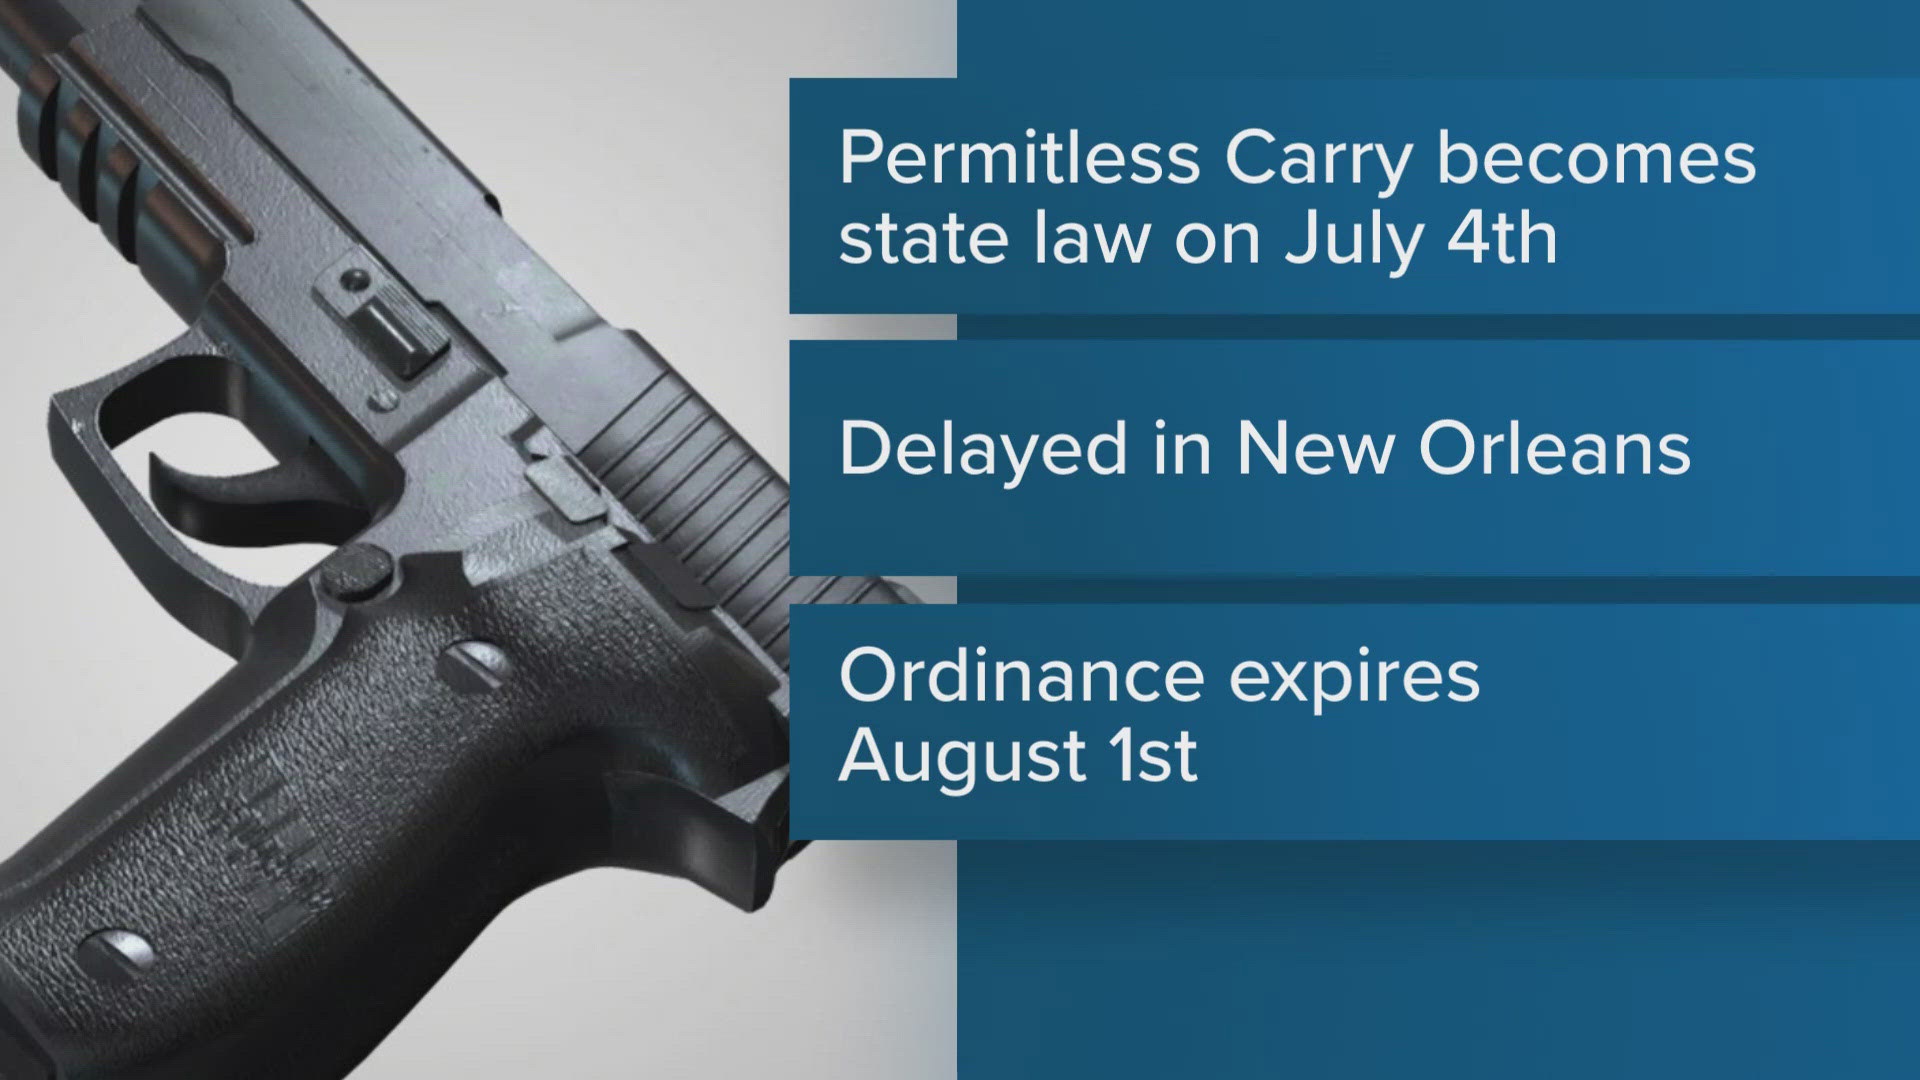 The NOPD gave an update on Louisiana's new permitless carry law, which gives adults the right to carry a concealed weapon without a permit – except in New Orleans.